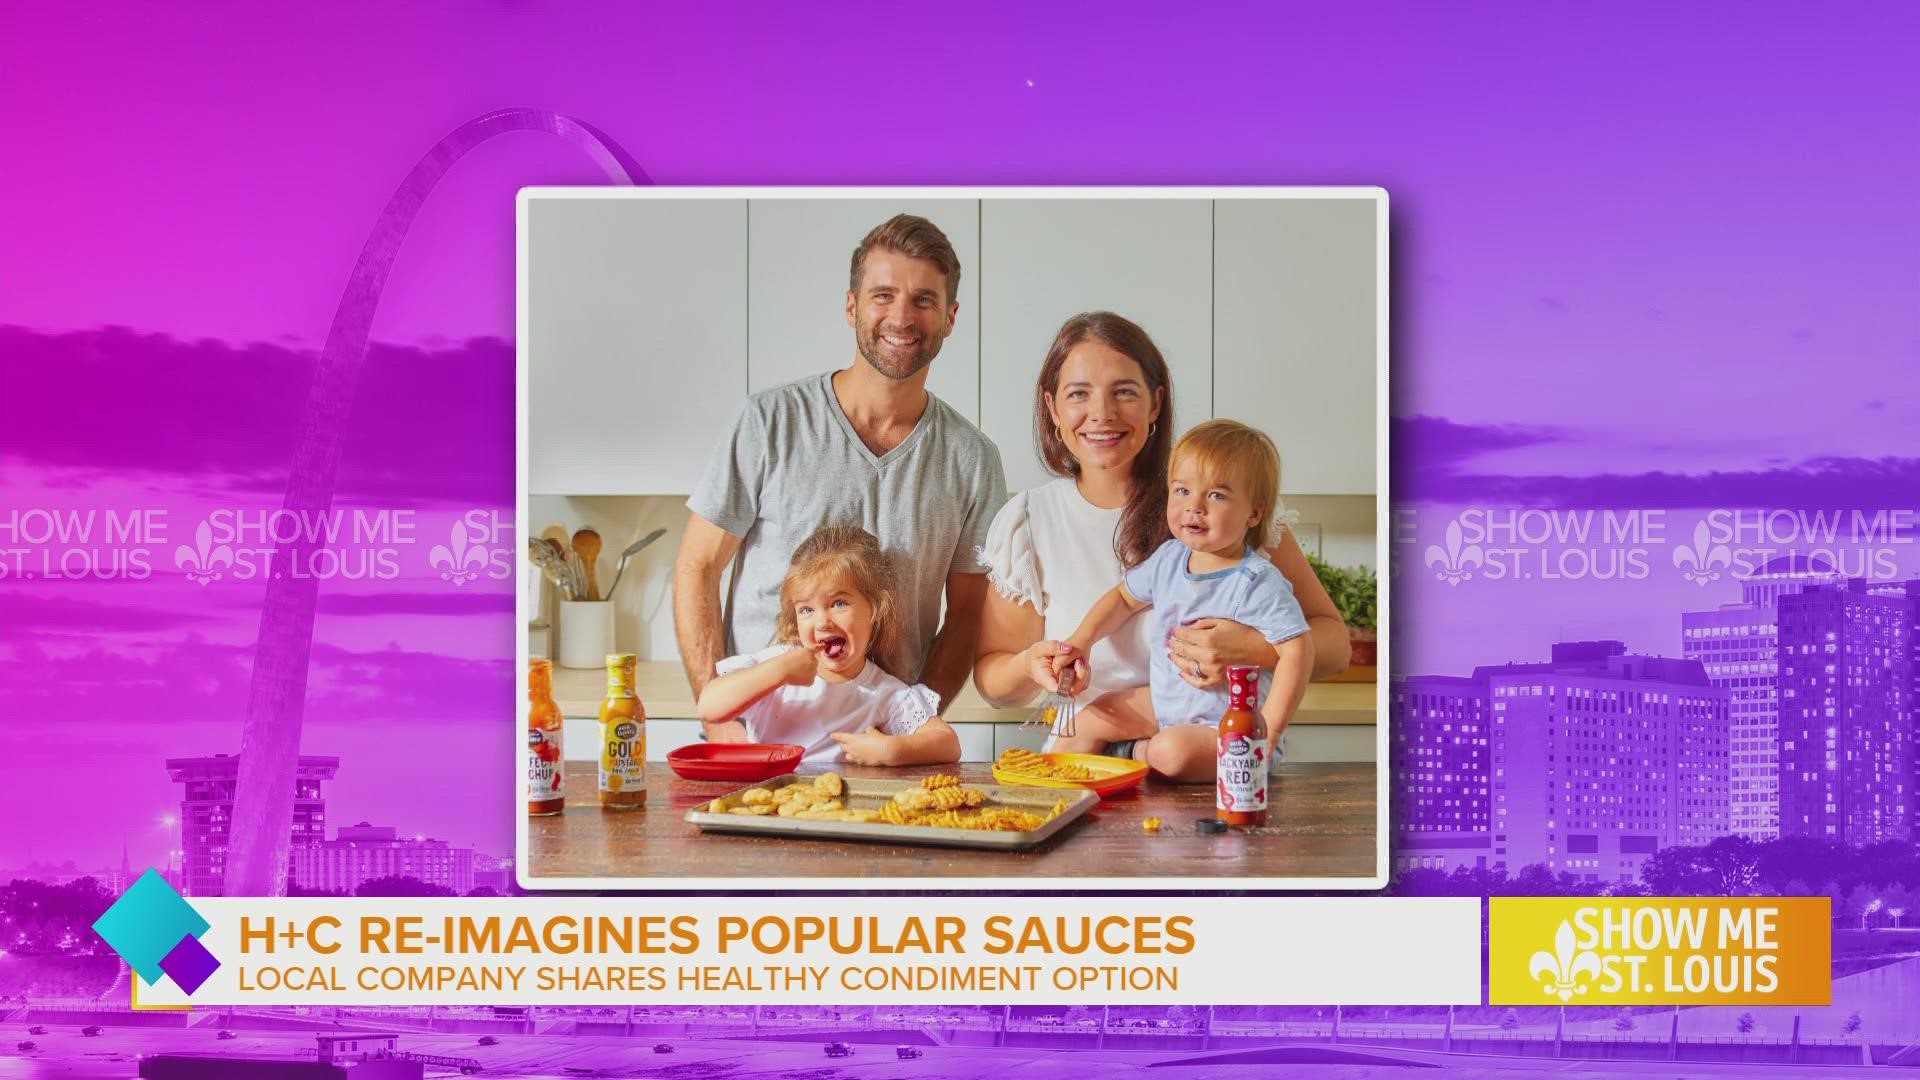 Halo + Cleaver is locally-owned by husband and wife Rob and Emilie Garwitz who wanted to clean condiments for themselves, their children and other families.